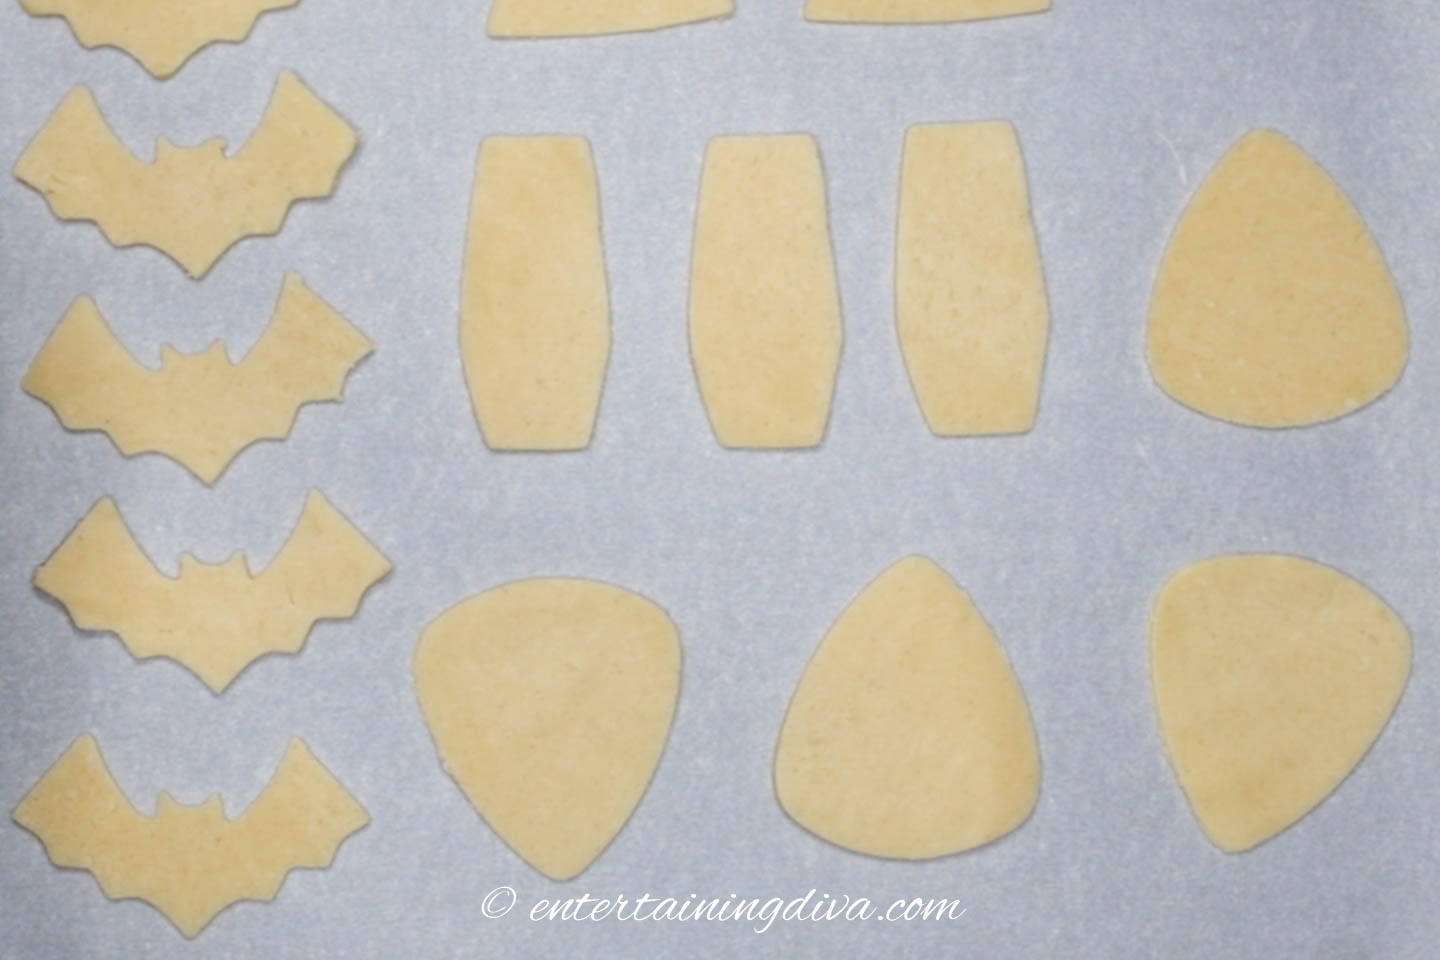 Cut out cookies on a cookie sheet